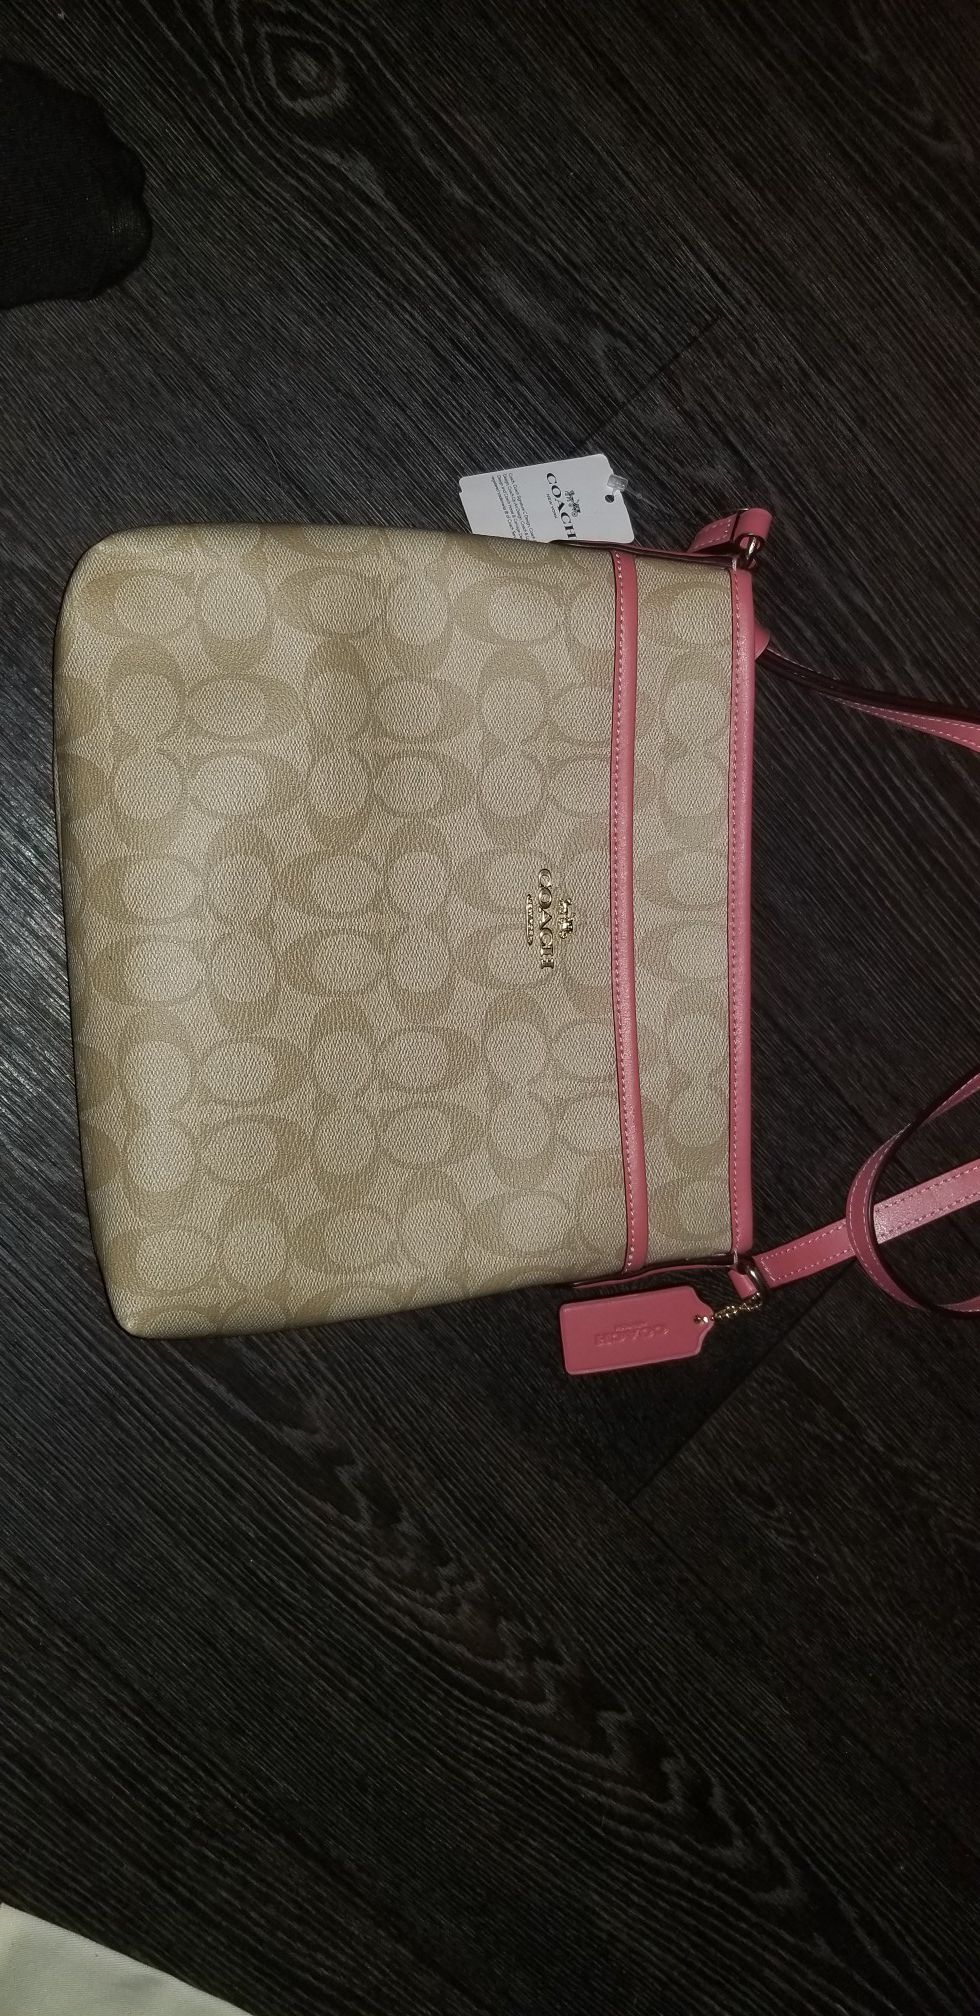 COACH BAG - COACH PURSE - KATE SPADE PURSE PACKAGE DEAL - ALL ITEMS BRAND NEW NEVER BEEN WORN OR USED